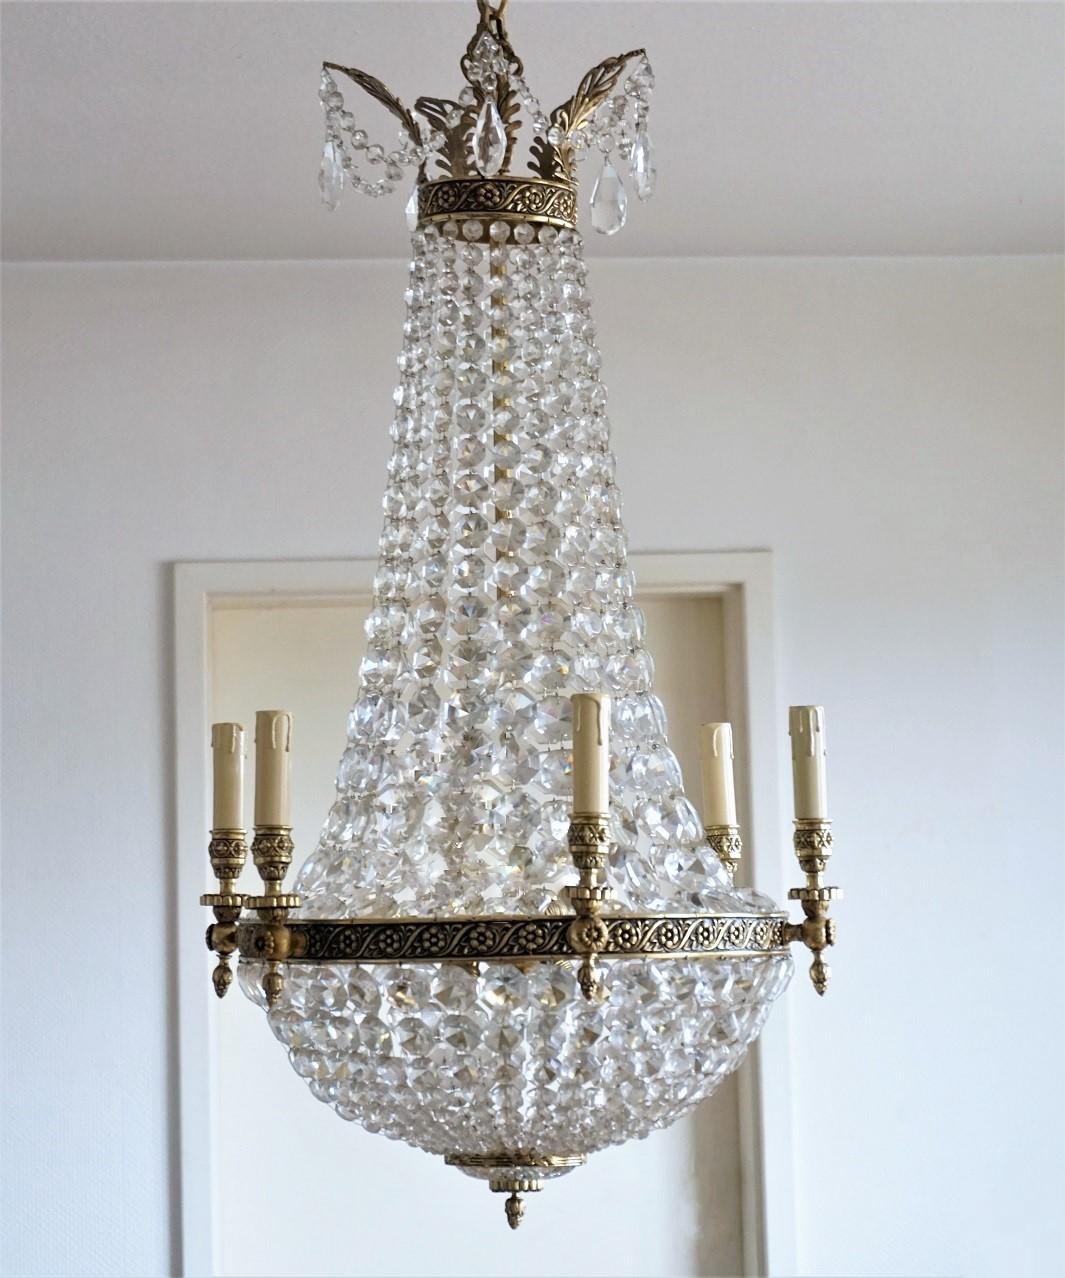 A very elegant Regency style faceted crystal twelve-light chandelier, France, 1900-1910. Solid bronze central ring with six lamp arms, crown shaped top with large crystal drops. The chandelier has been hand polished and cleaned to its original